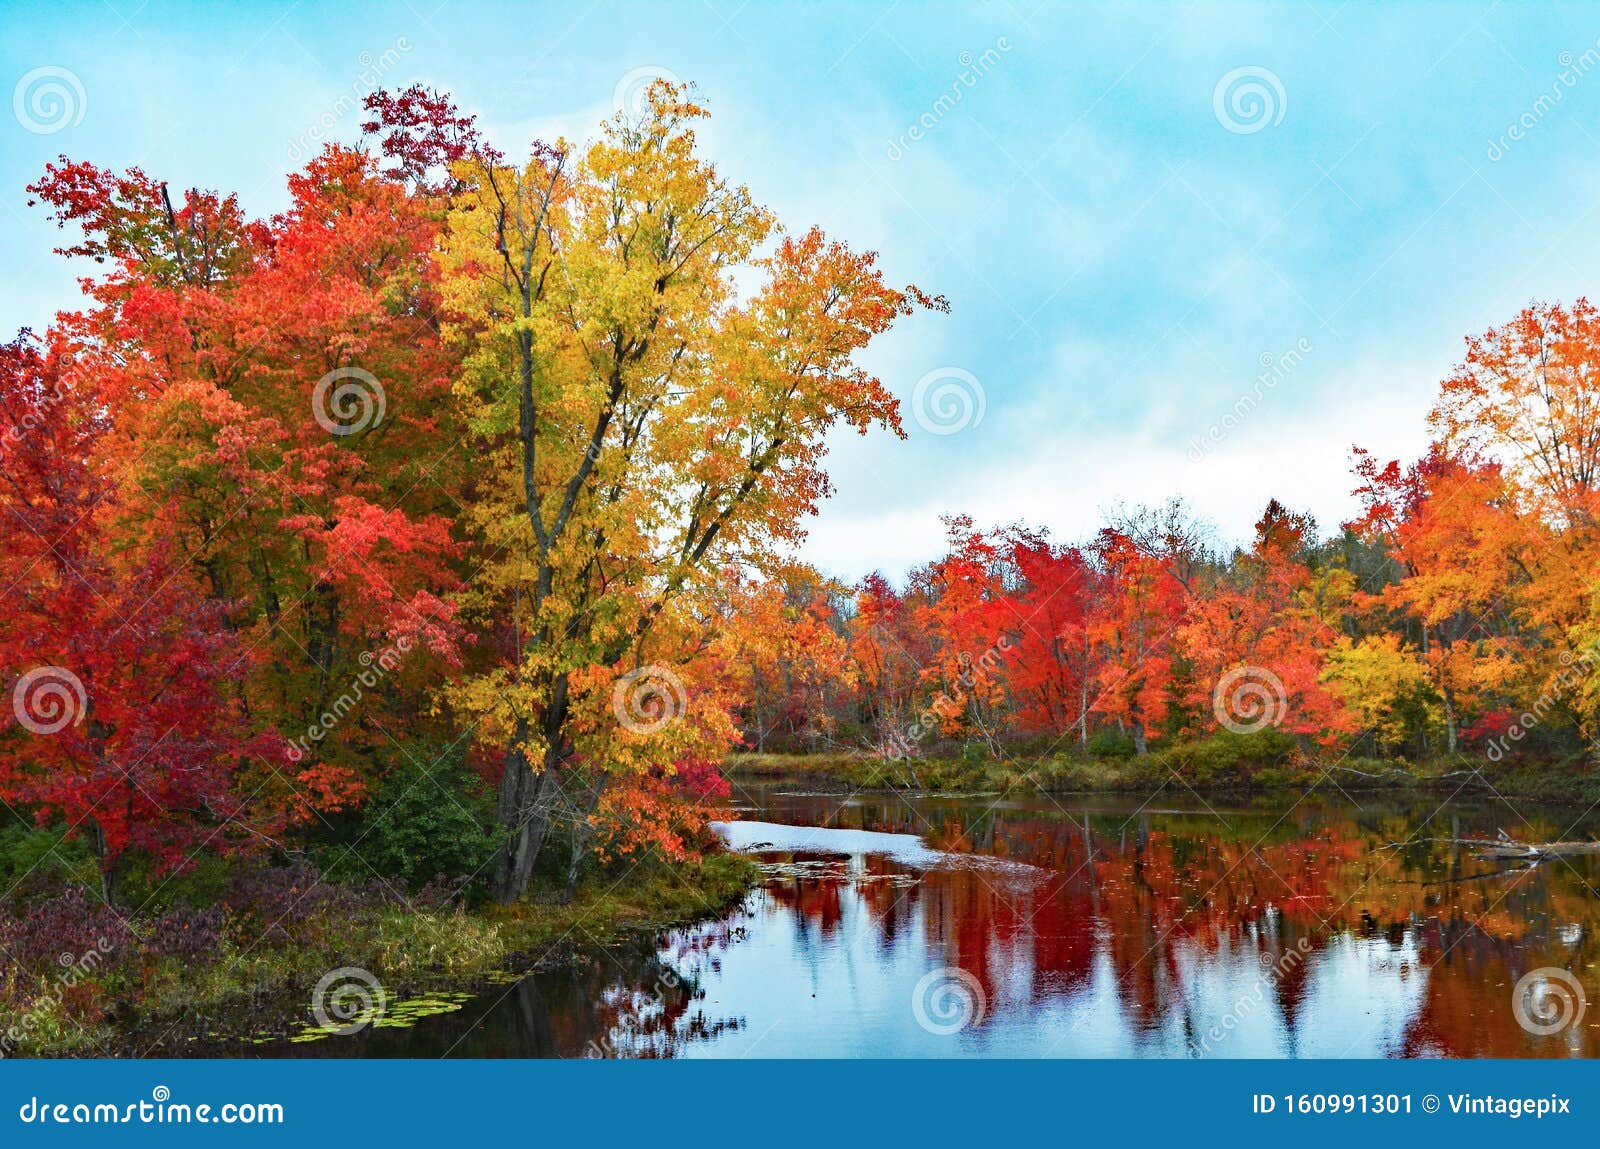 Gorgeous Fall Sugar Maple Trees With Reflection In A Lake Stock Image